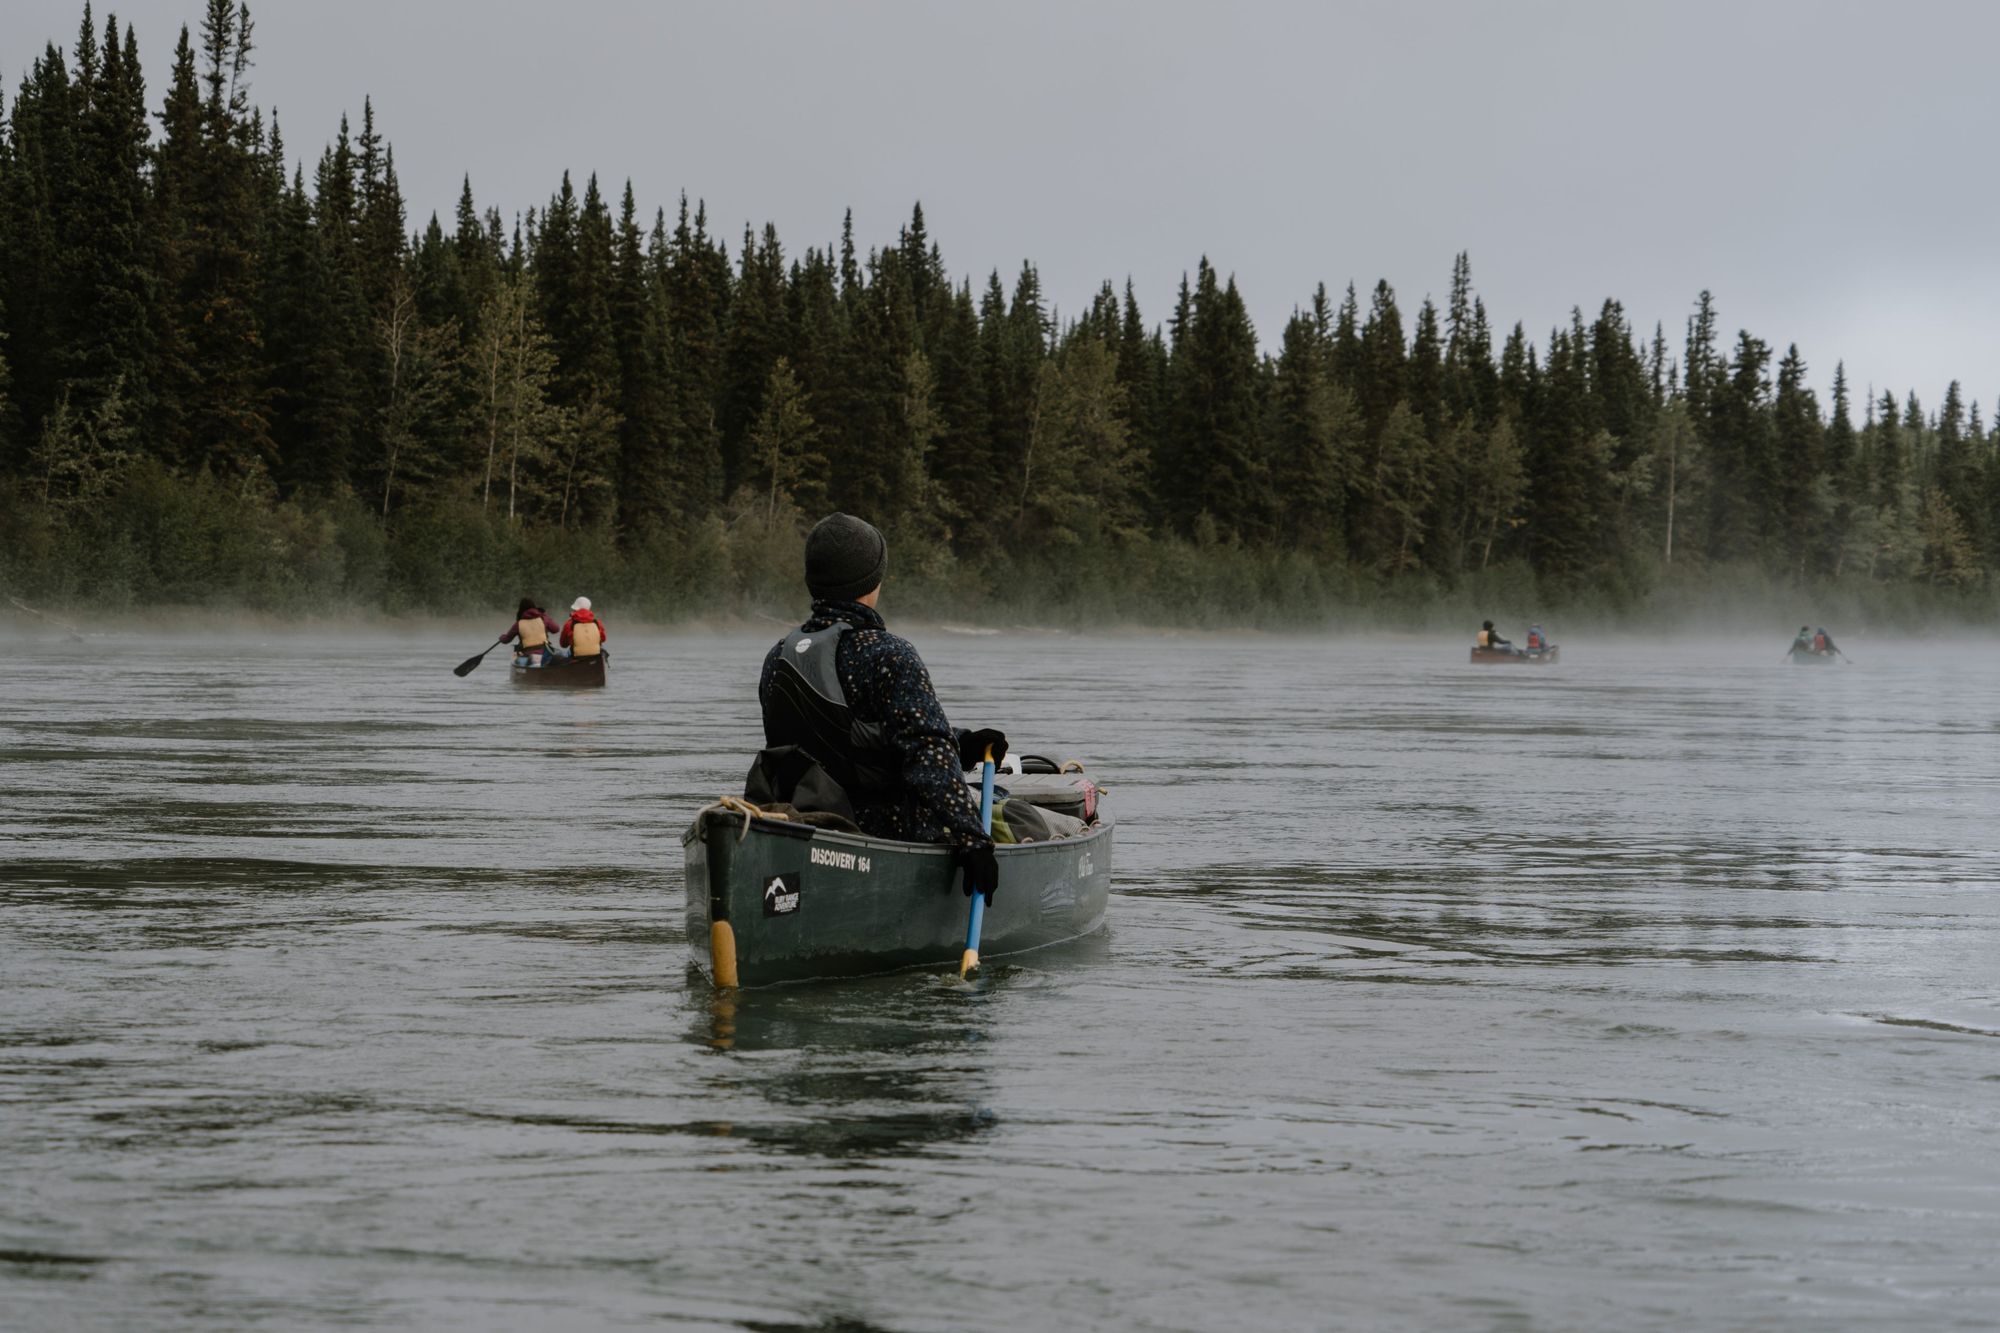 A group of canoeists on the Yukon River on a misty morning.